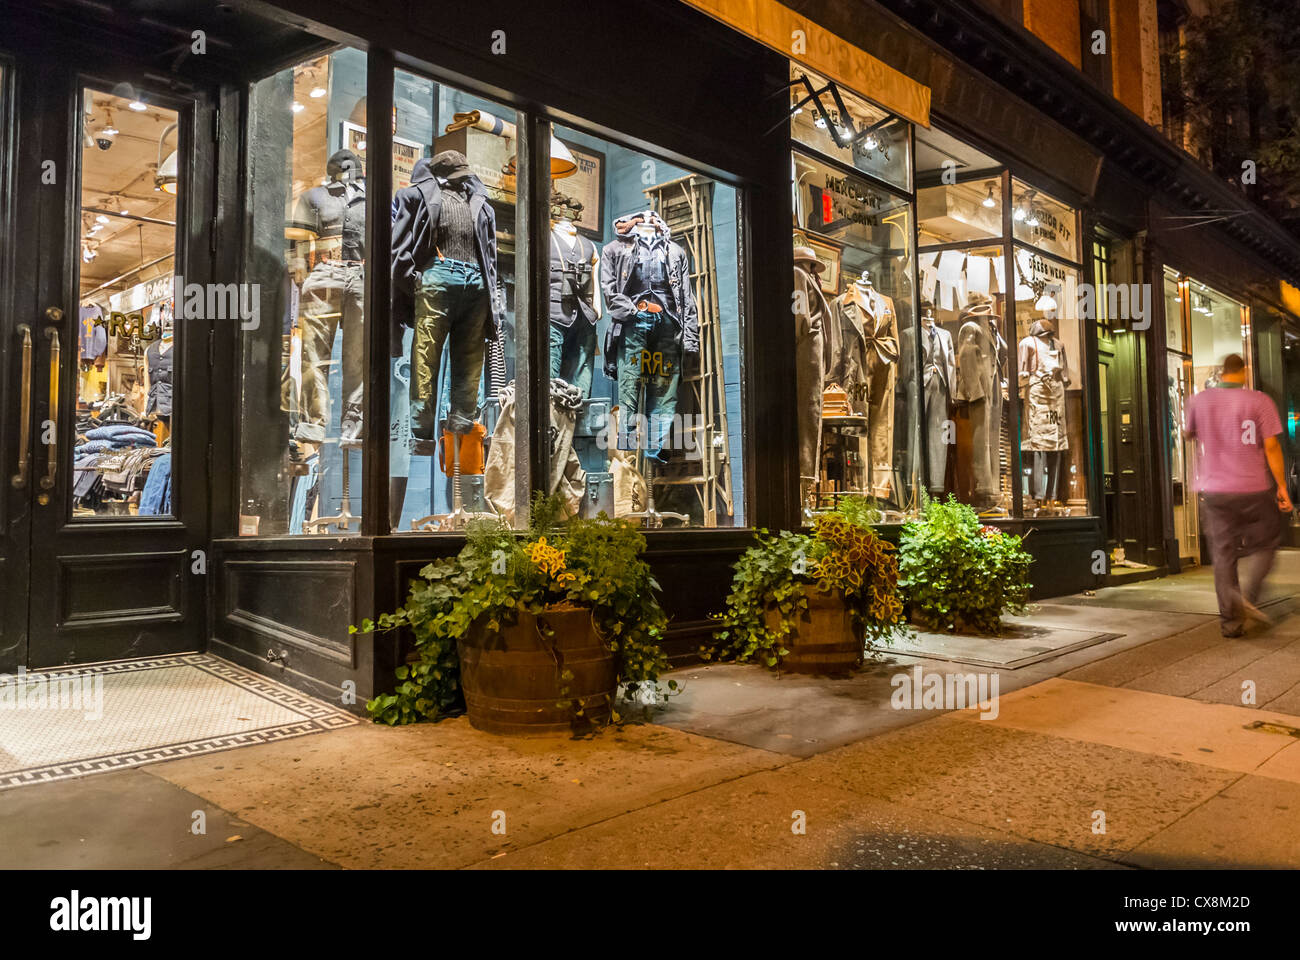 New York City, NY, USA, Street Scenes, "Ralph Lauren" shop fronts Clothes  Shopping in Greenwich Village, fashion mannequins, Small Shop Night, row of  shops fronts Stock Photo - Alamy